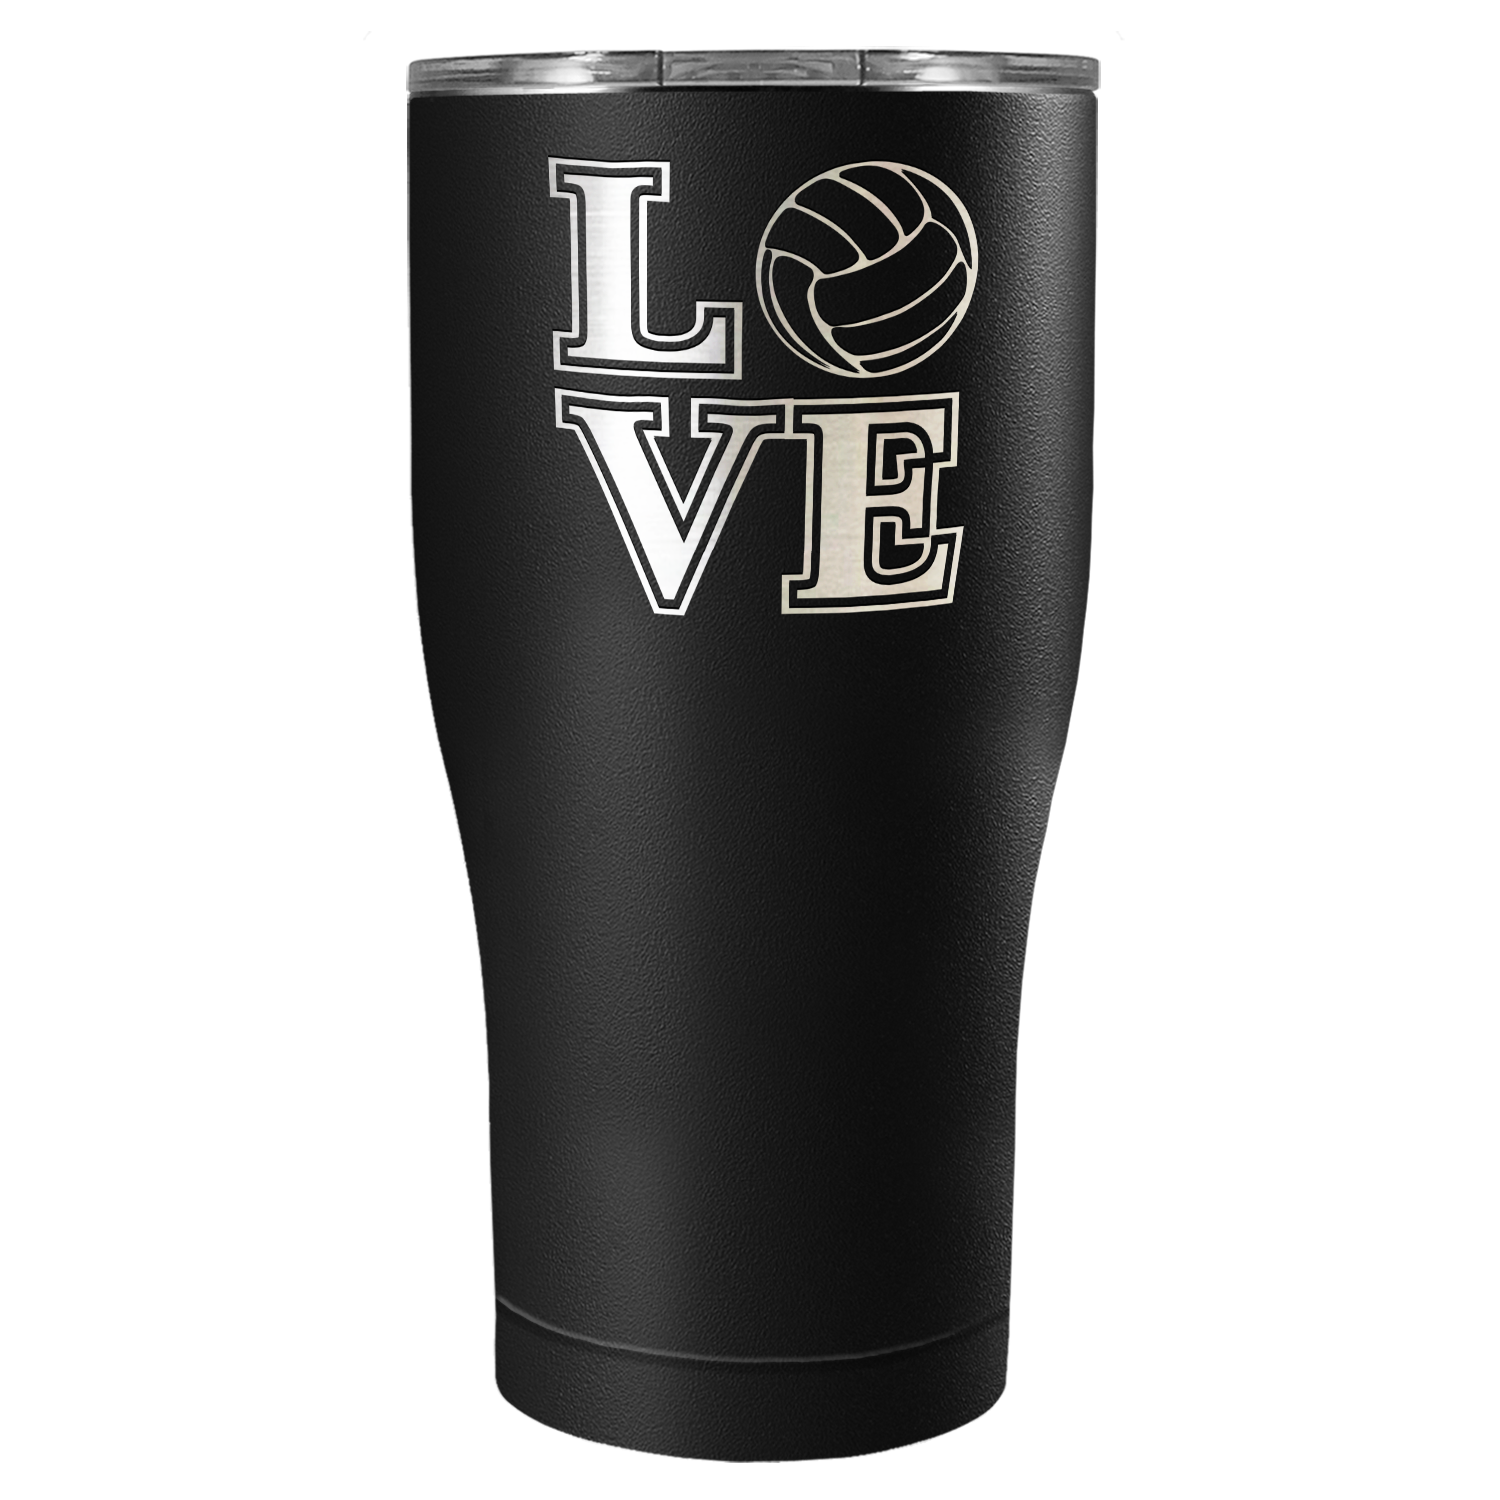 LOVE Volleyball 27oz Curve Stainless Steel Tumbler